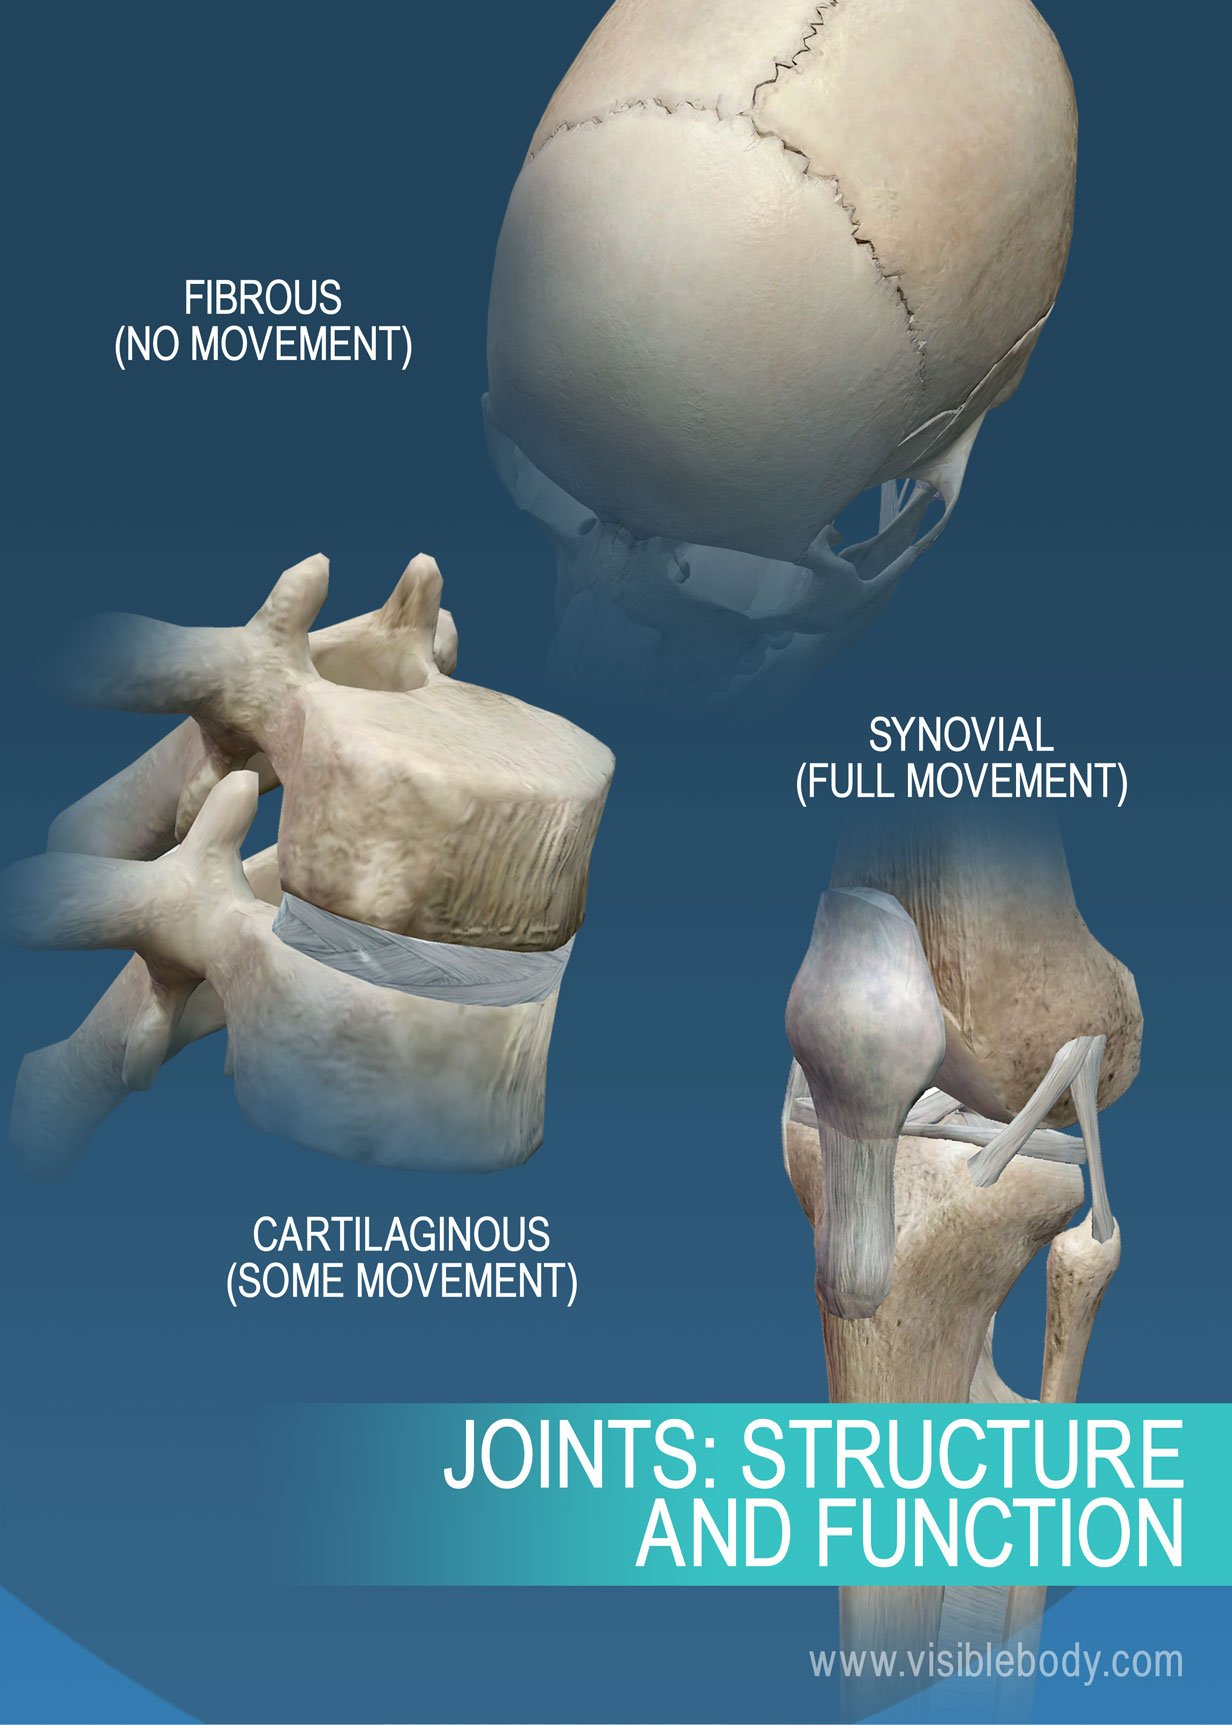 This image shows some examples of the movements of joints and